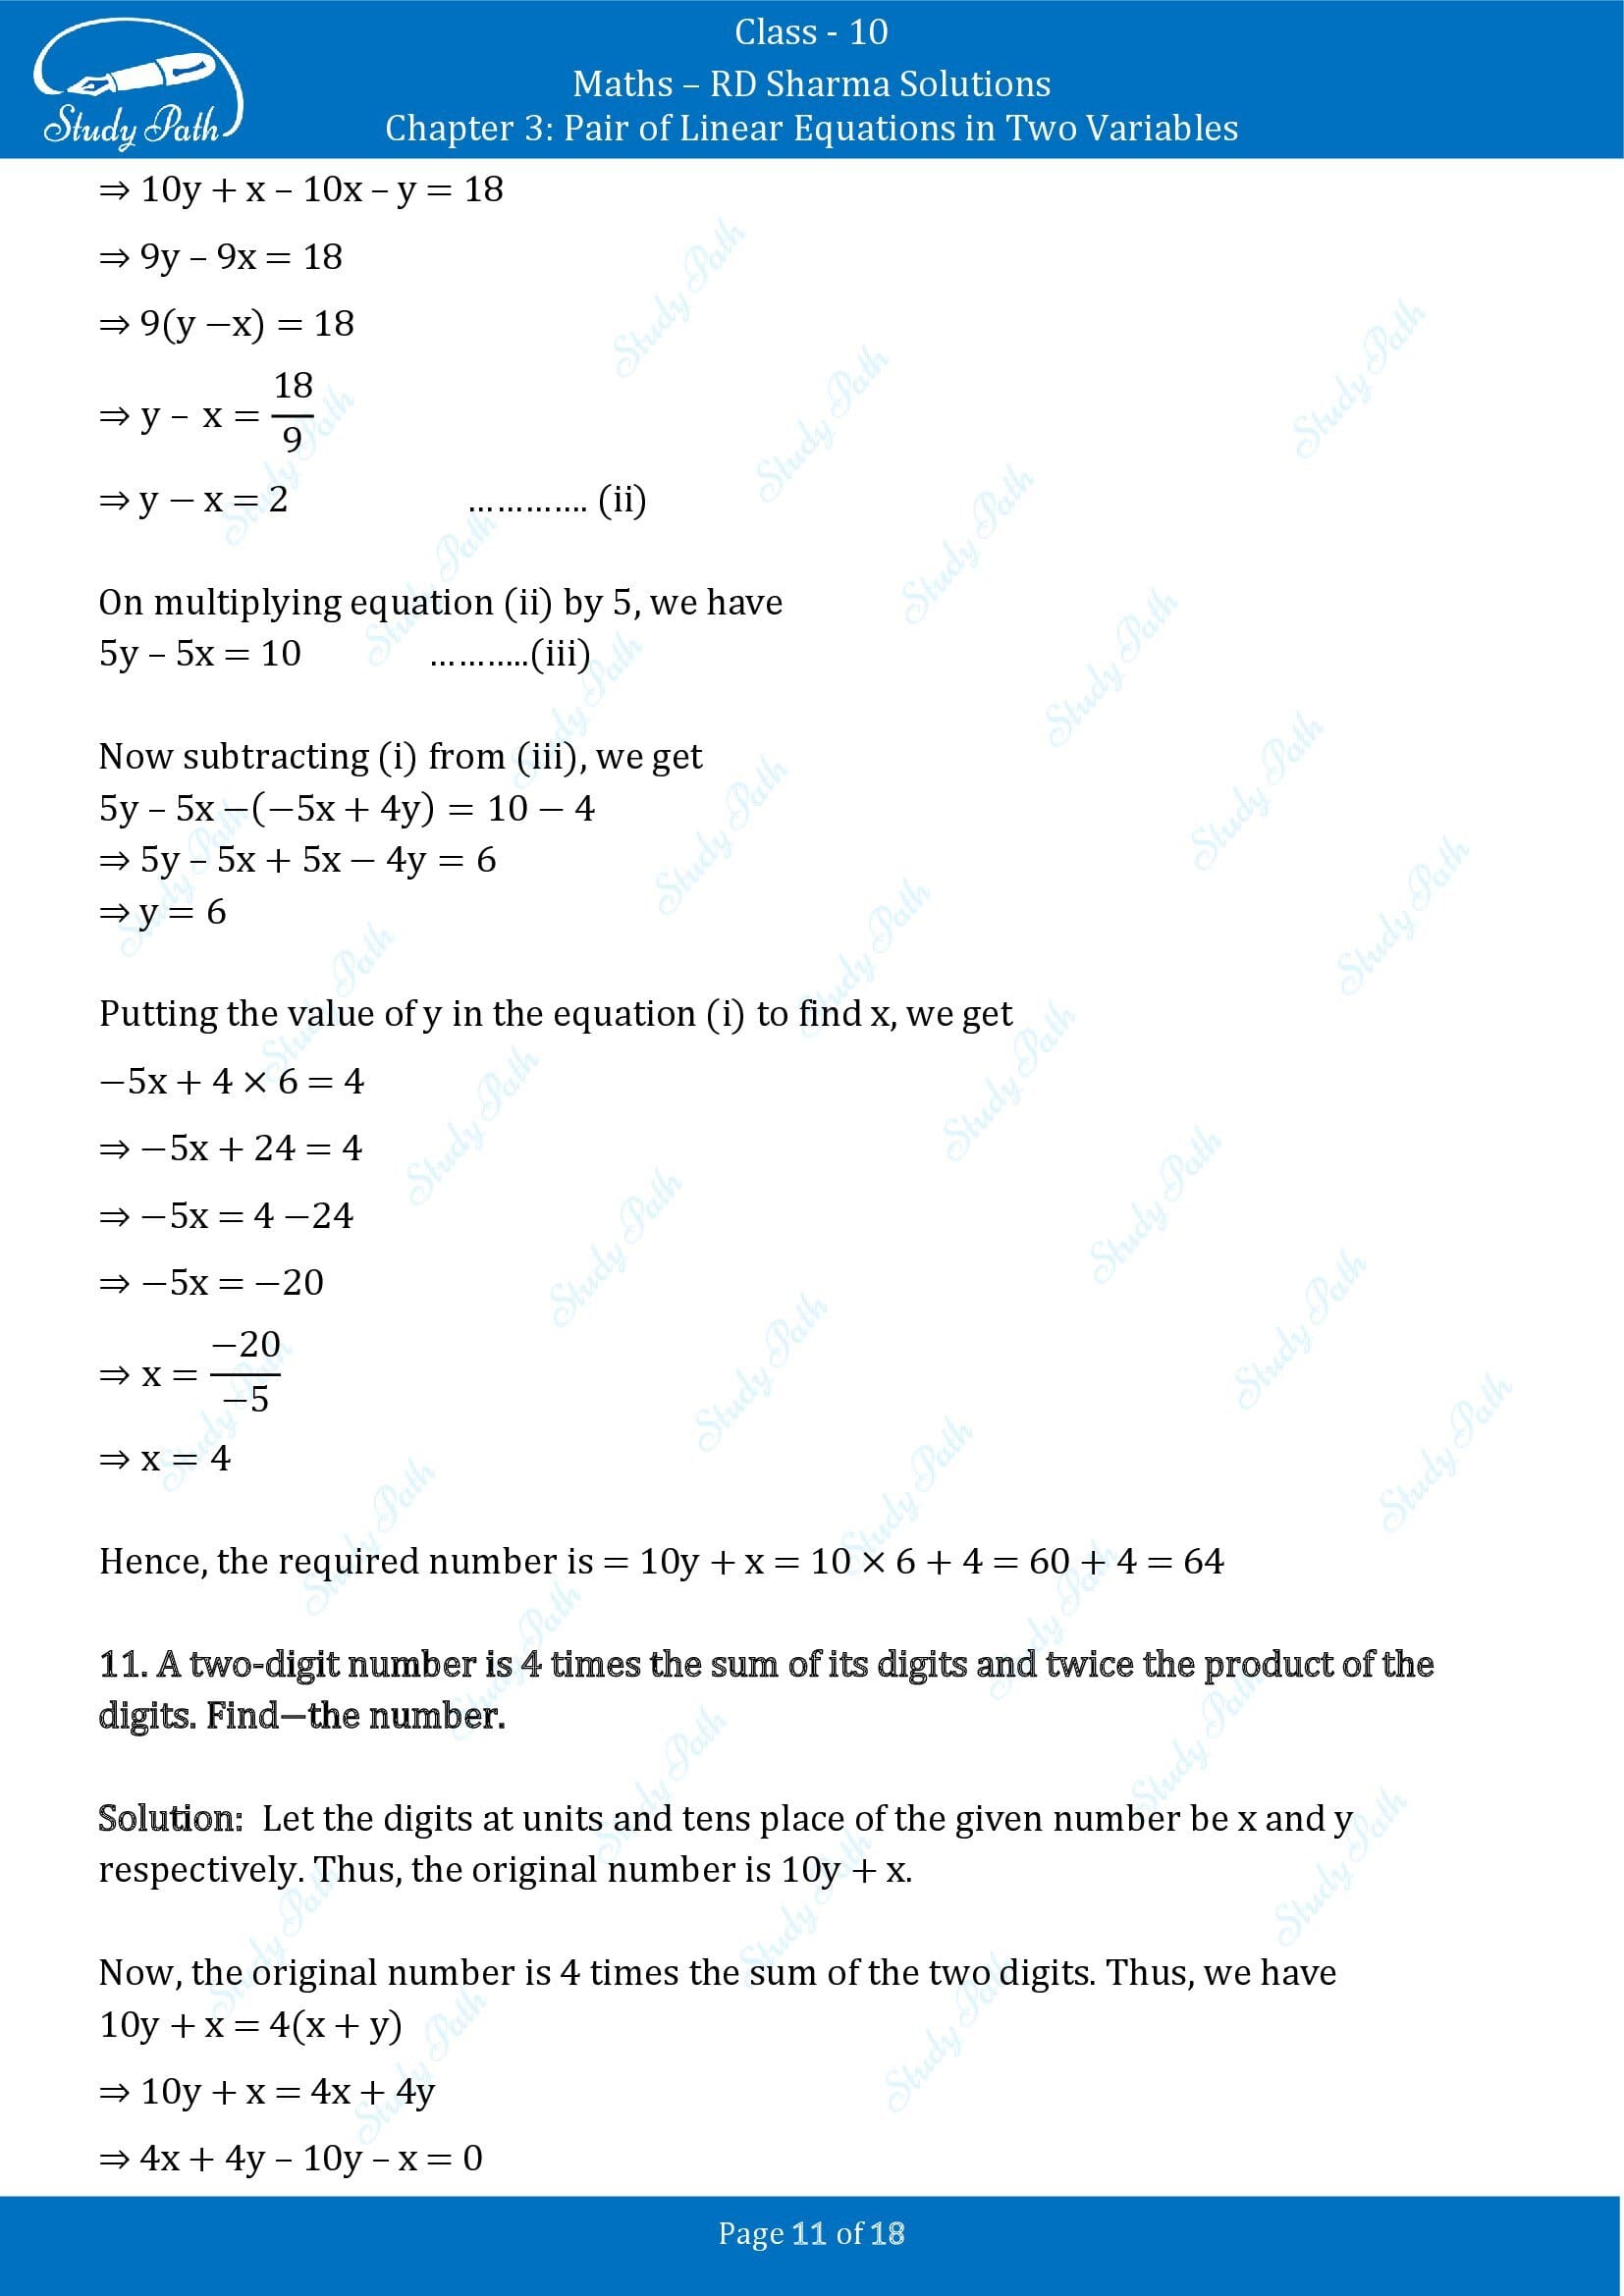 RD Sharma Solutions Class 10 Chapter 3 Pair of Linear Equations in Two Variables Exercise 3.7 00011